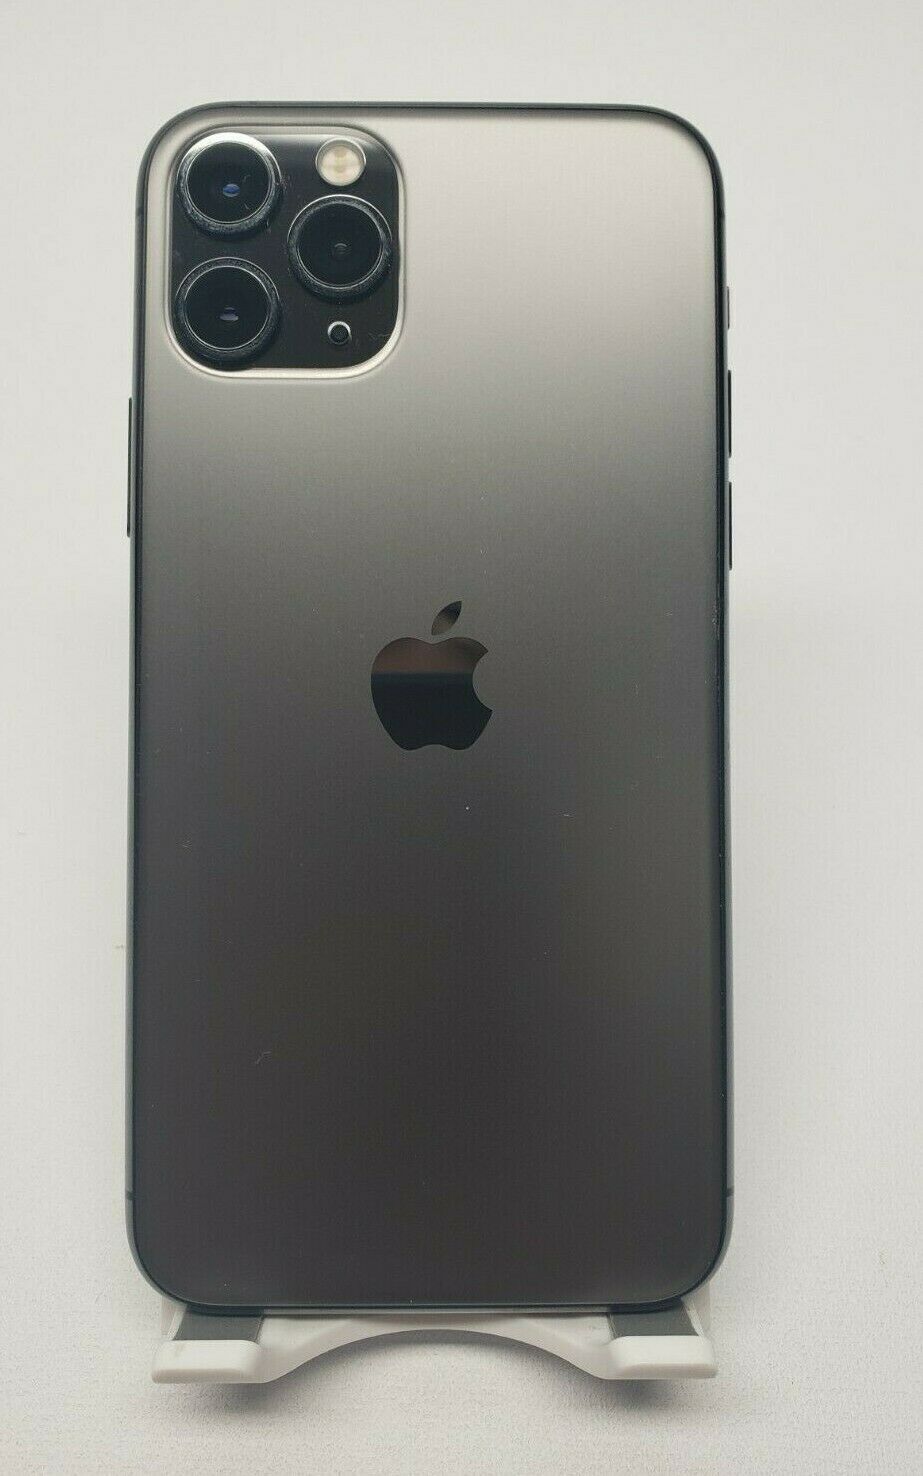 Apple iPhone 11 Pro Max 64gb Space Grey for sale online | eBay